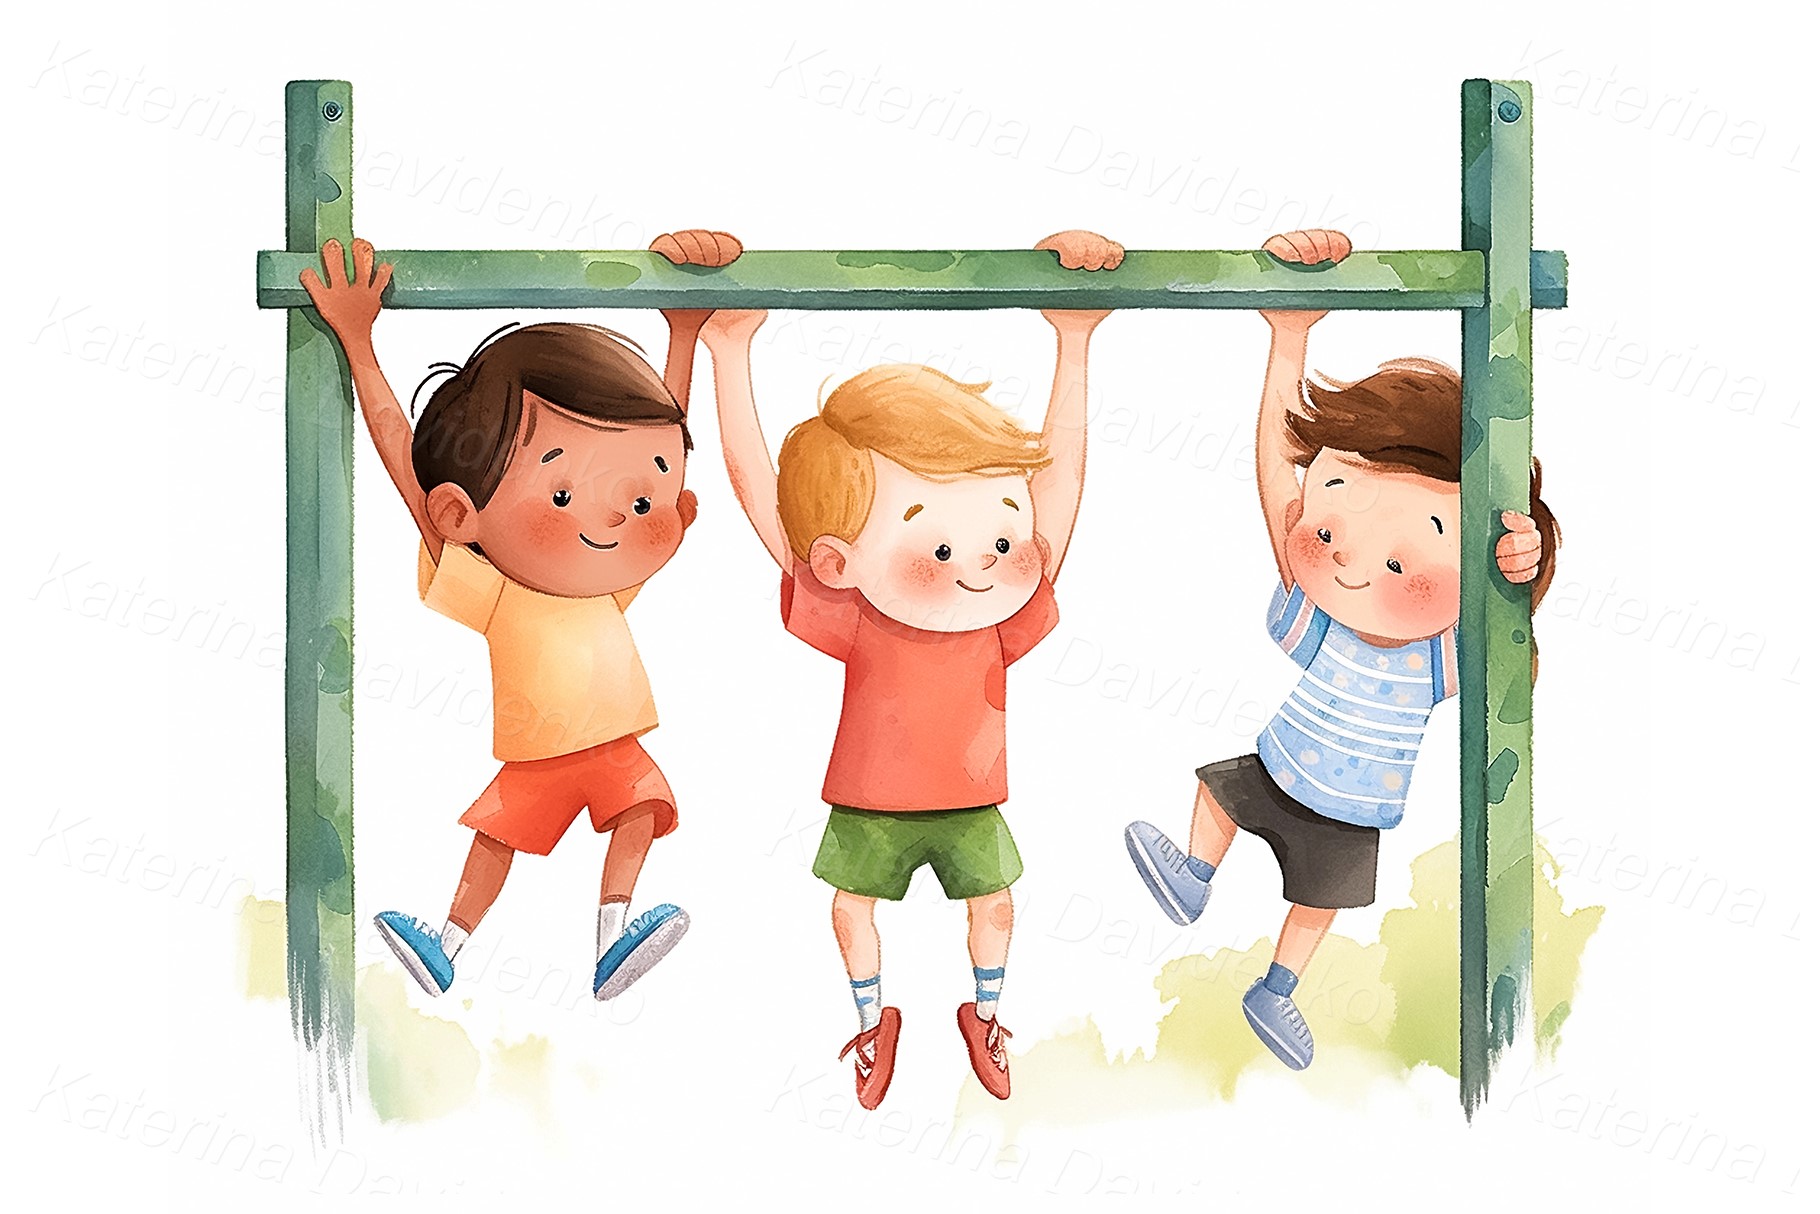 Watercolor illustration of a group of happy cartoon children hanging on a horizontal bar